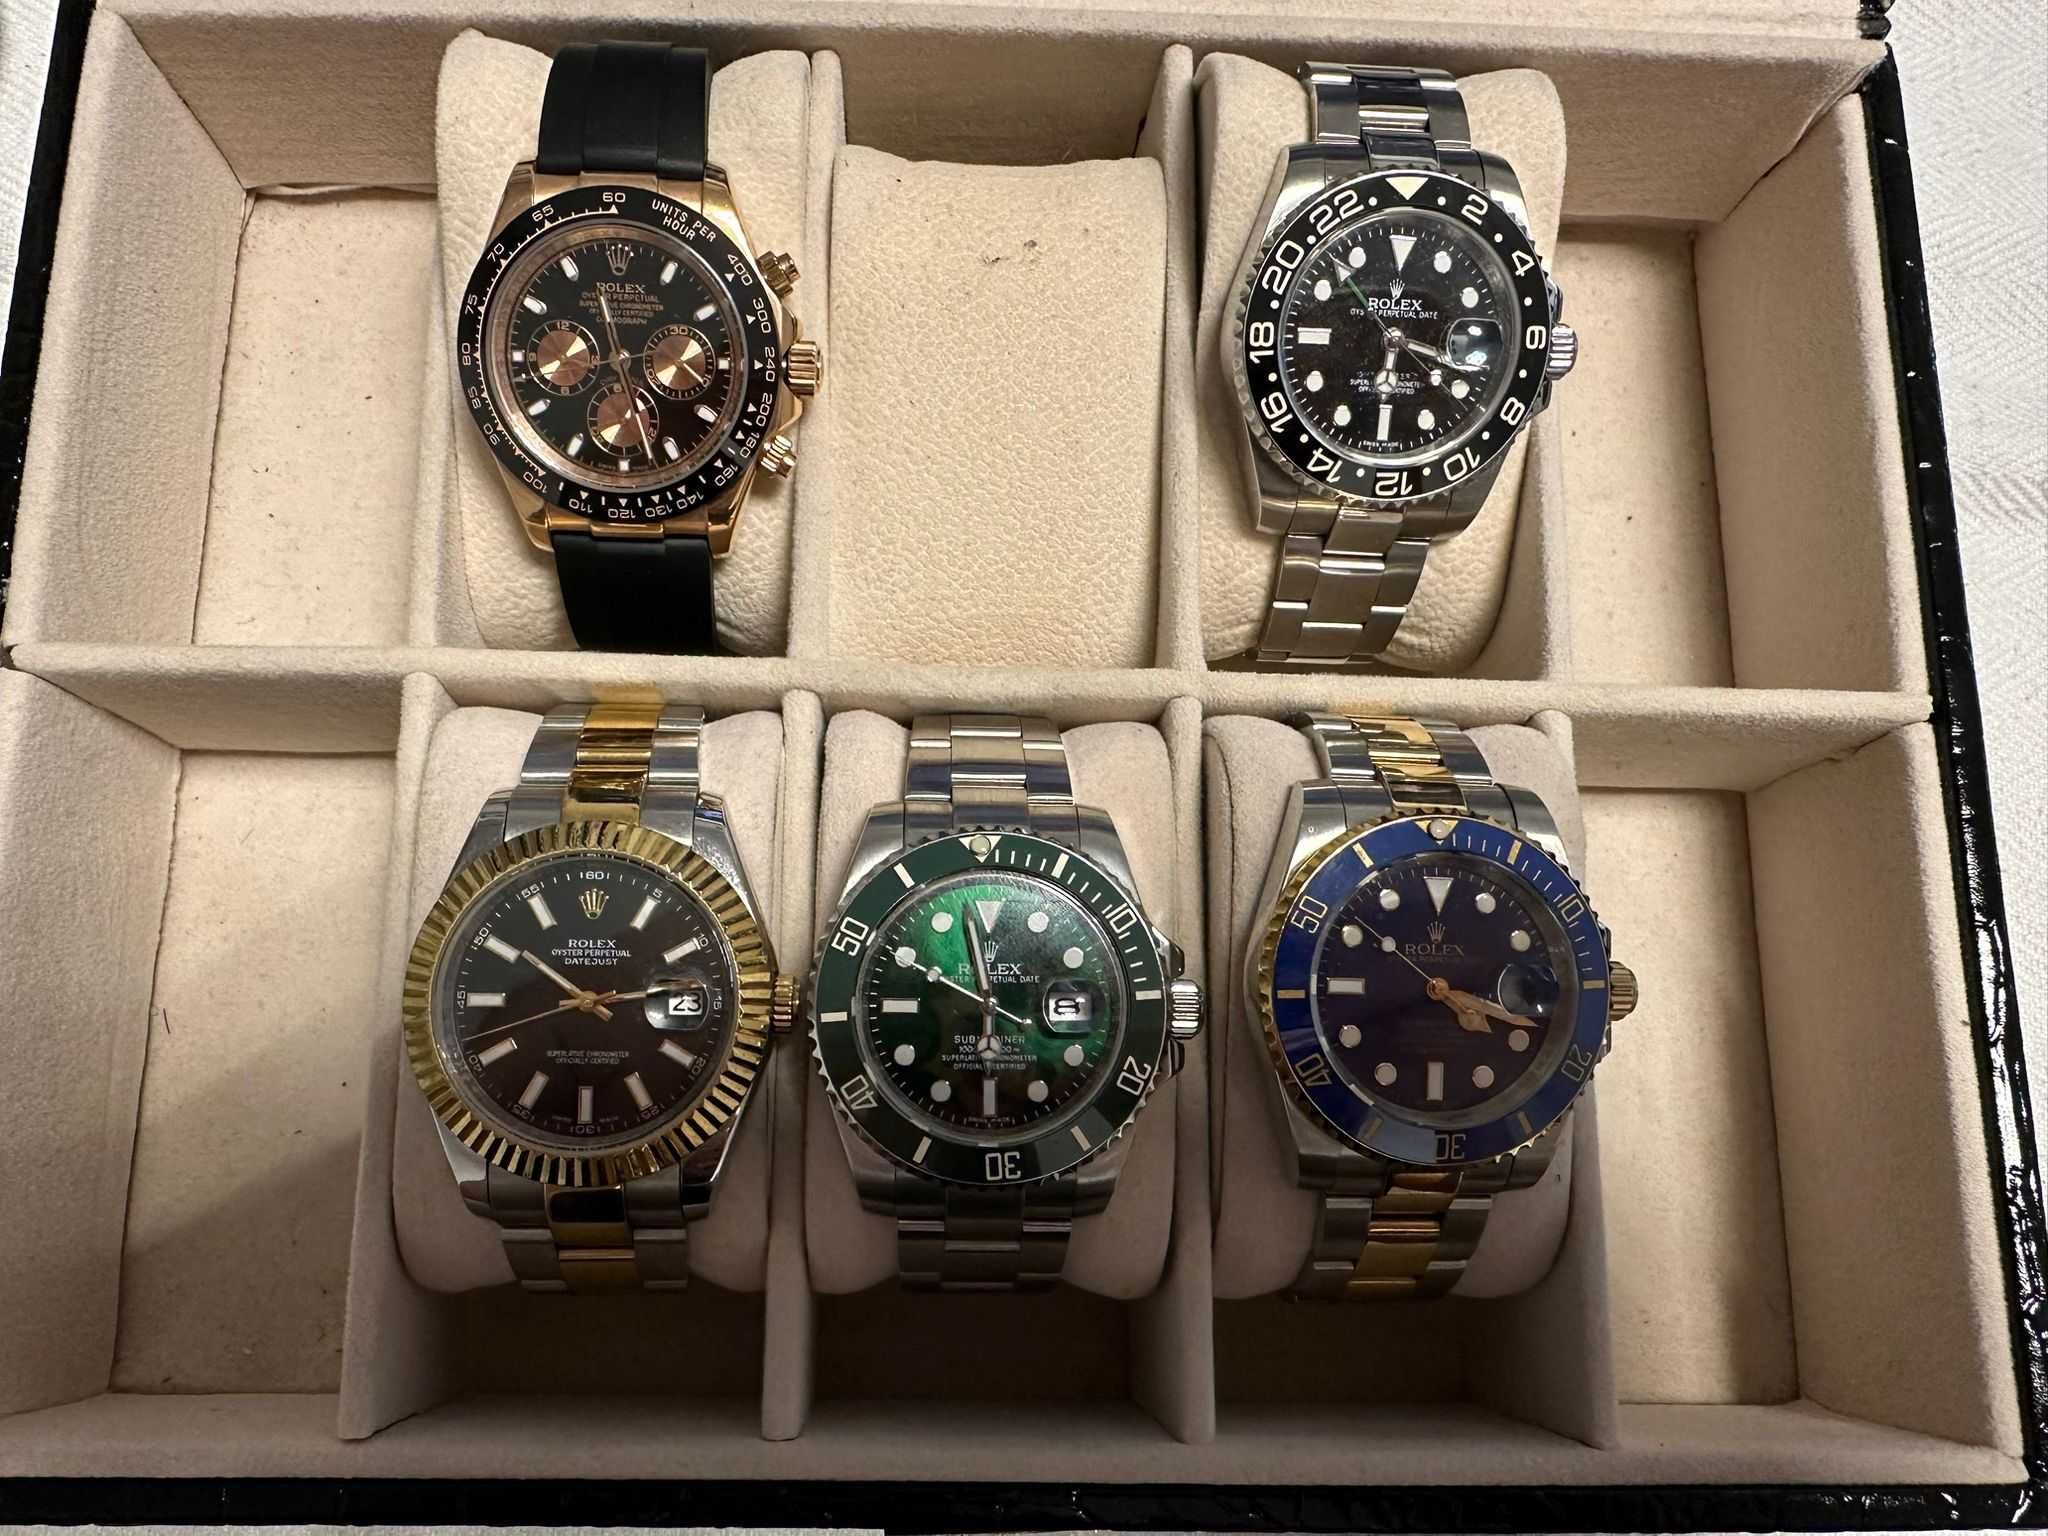 Ceas Rolex Oyster Perpetual Date GMT-Master II - Automatic